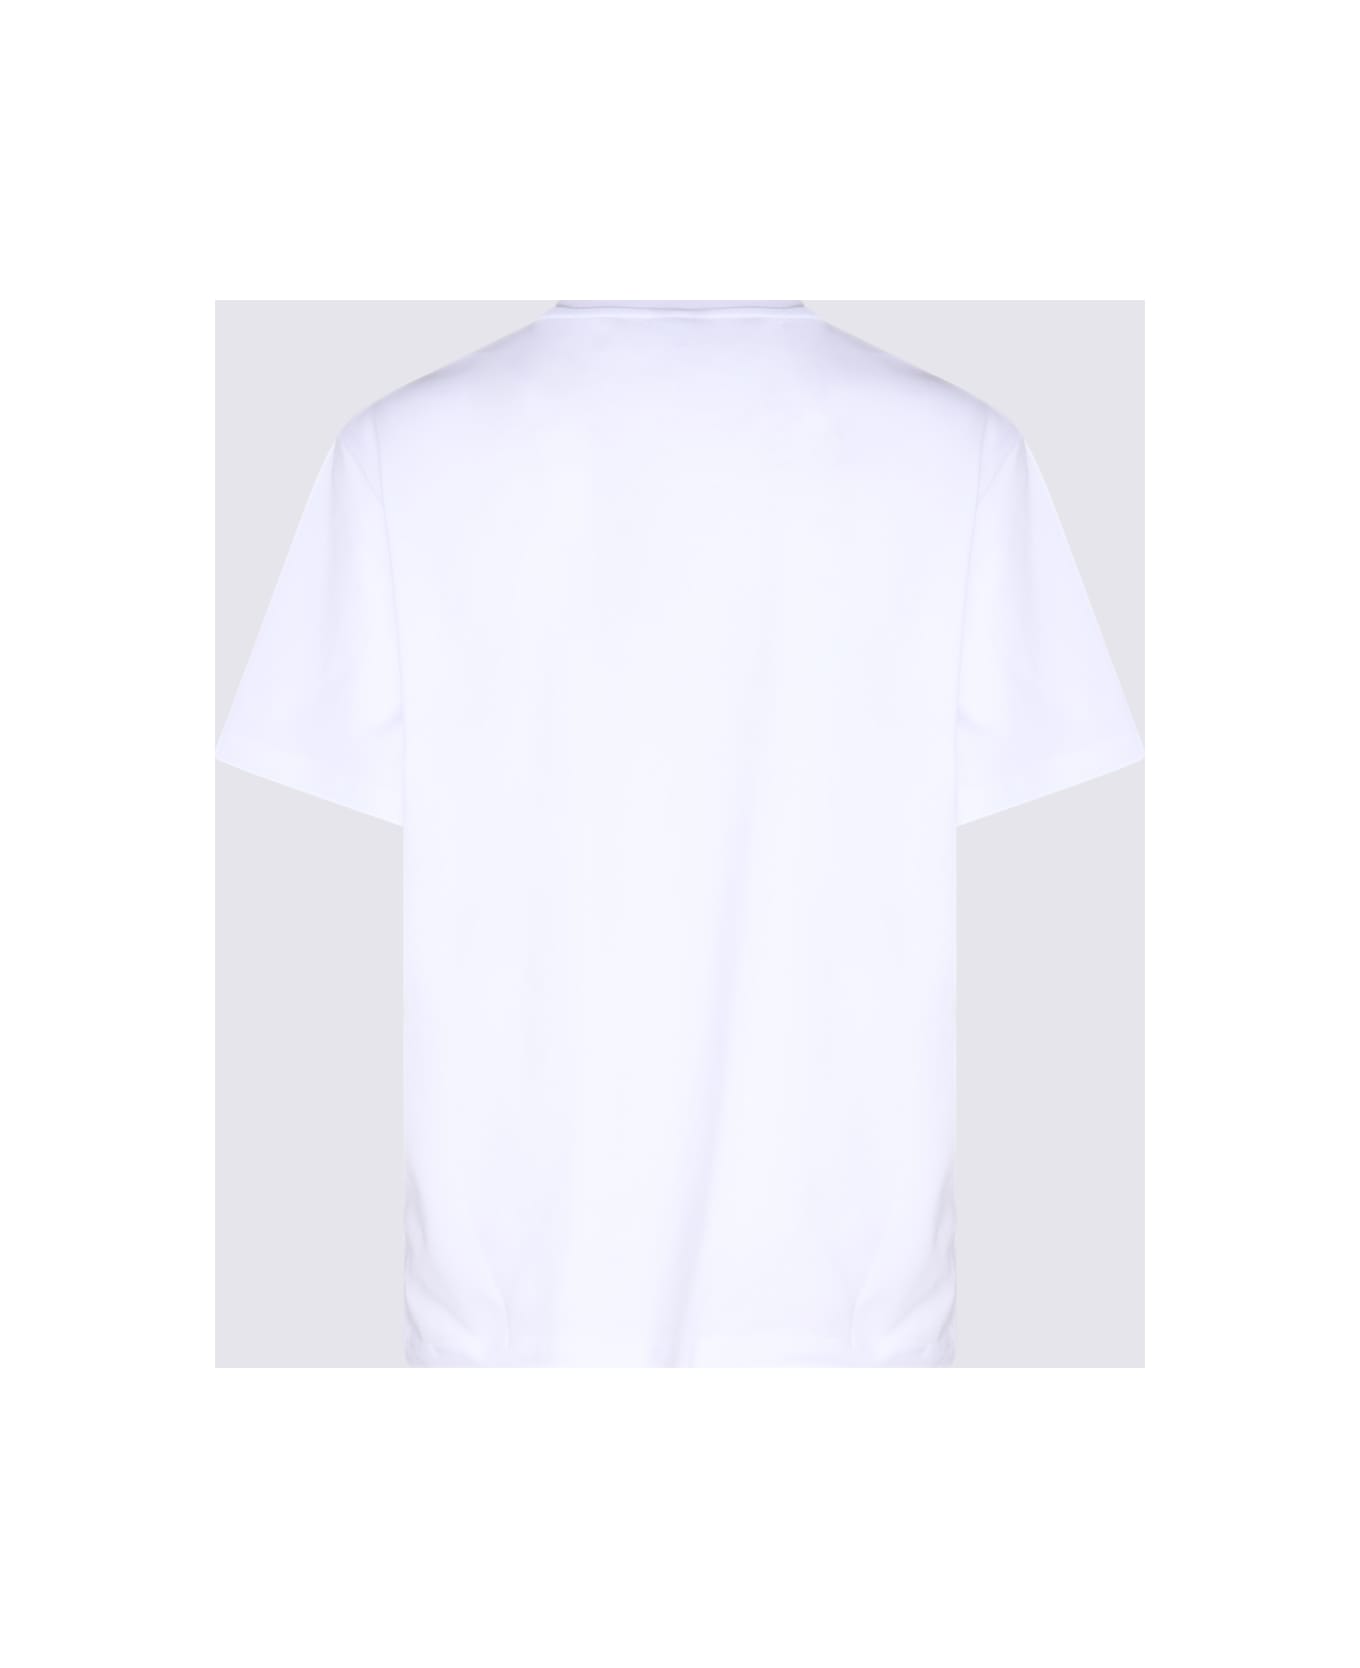 Daily Paper White And Black Cotton T-shirt - White